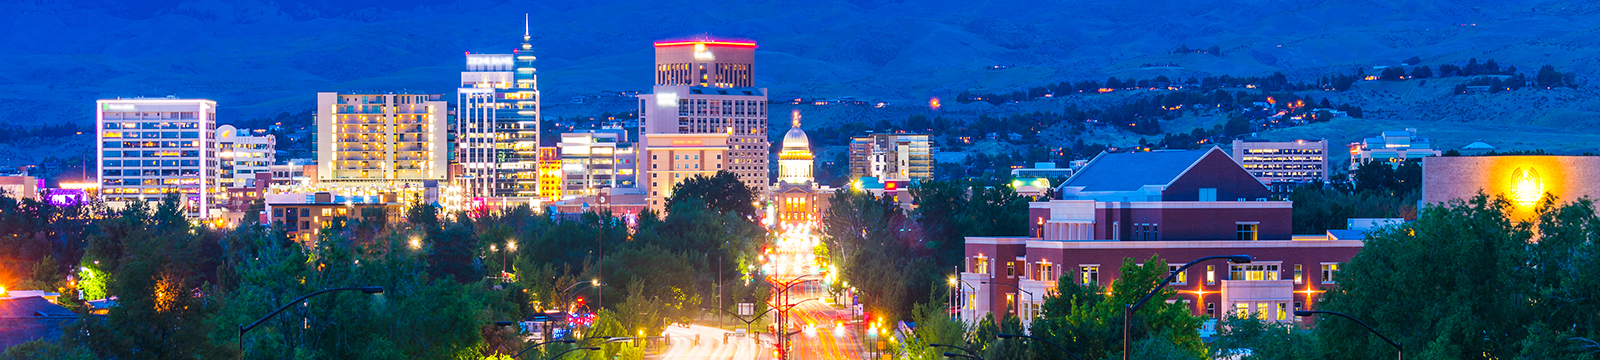 Panorama of downtown Boise in the early evening